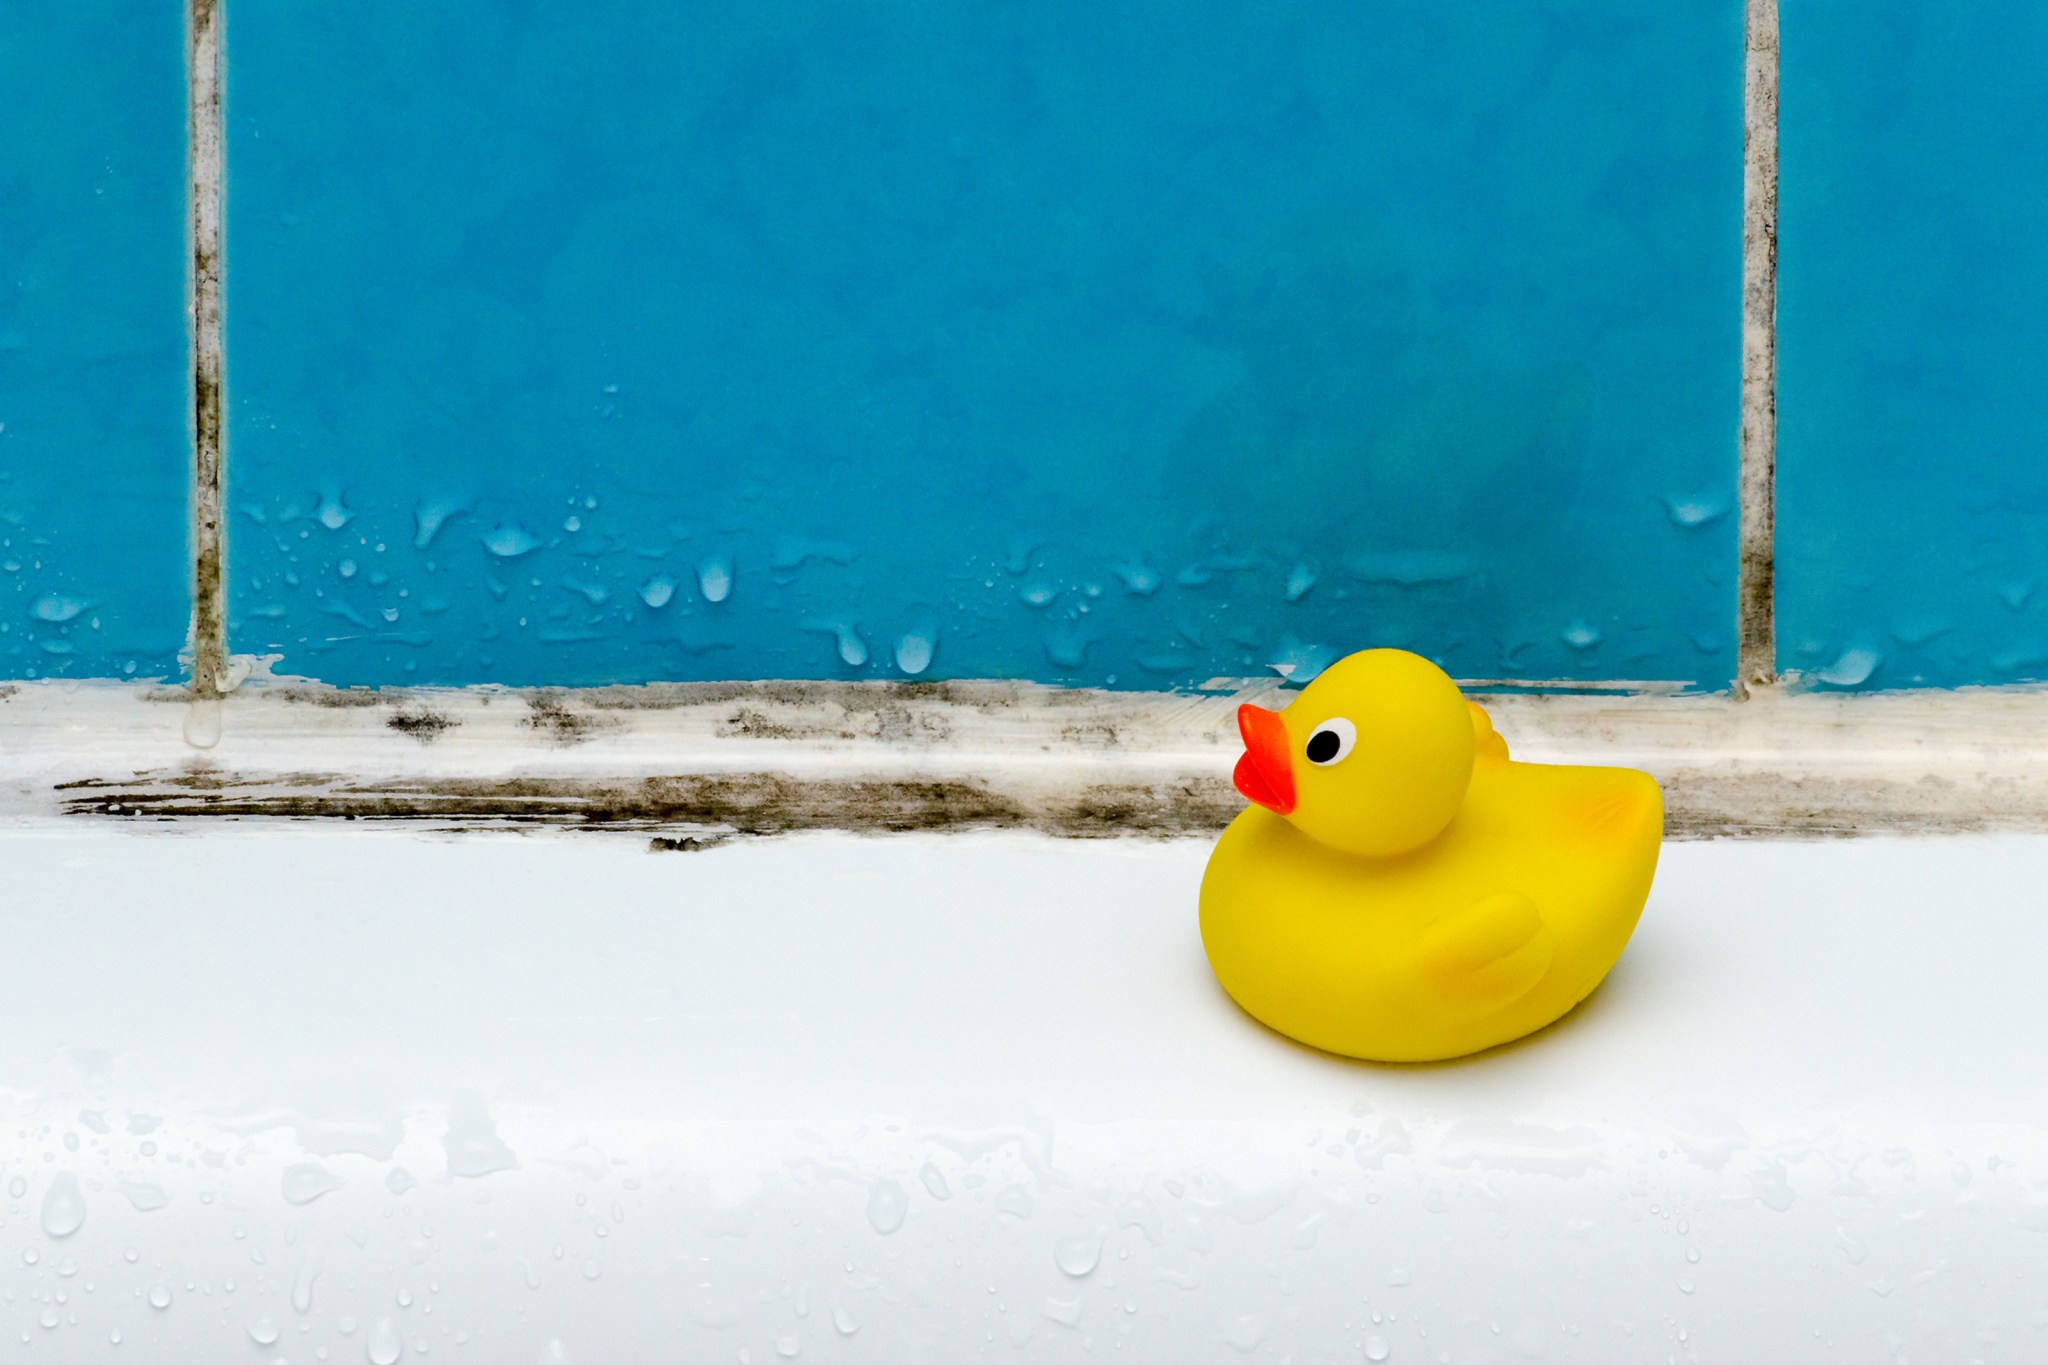 replace old caulk image of yellow rubber duck along edge of tub shower with moldy caulk with blue tile